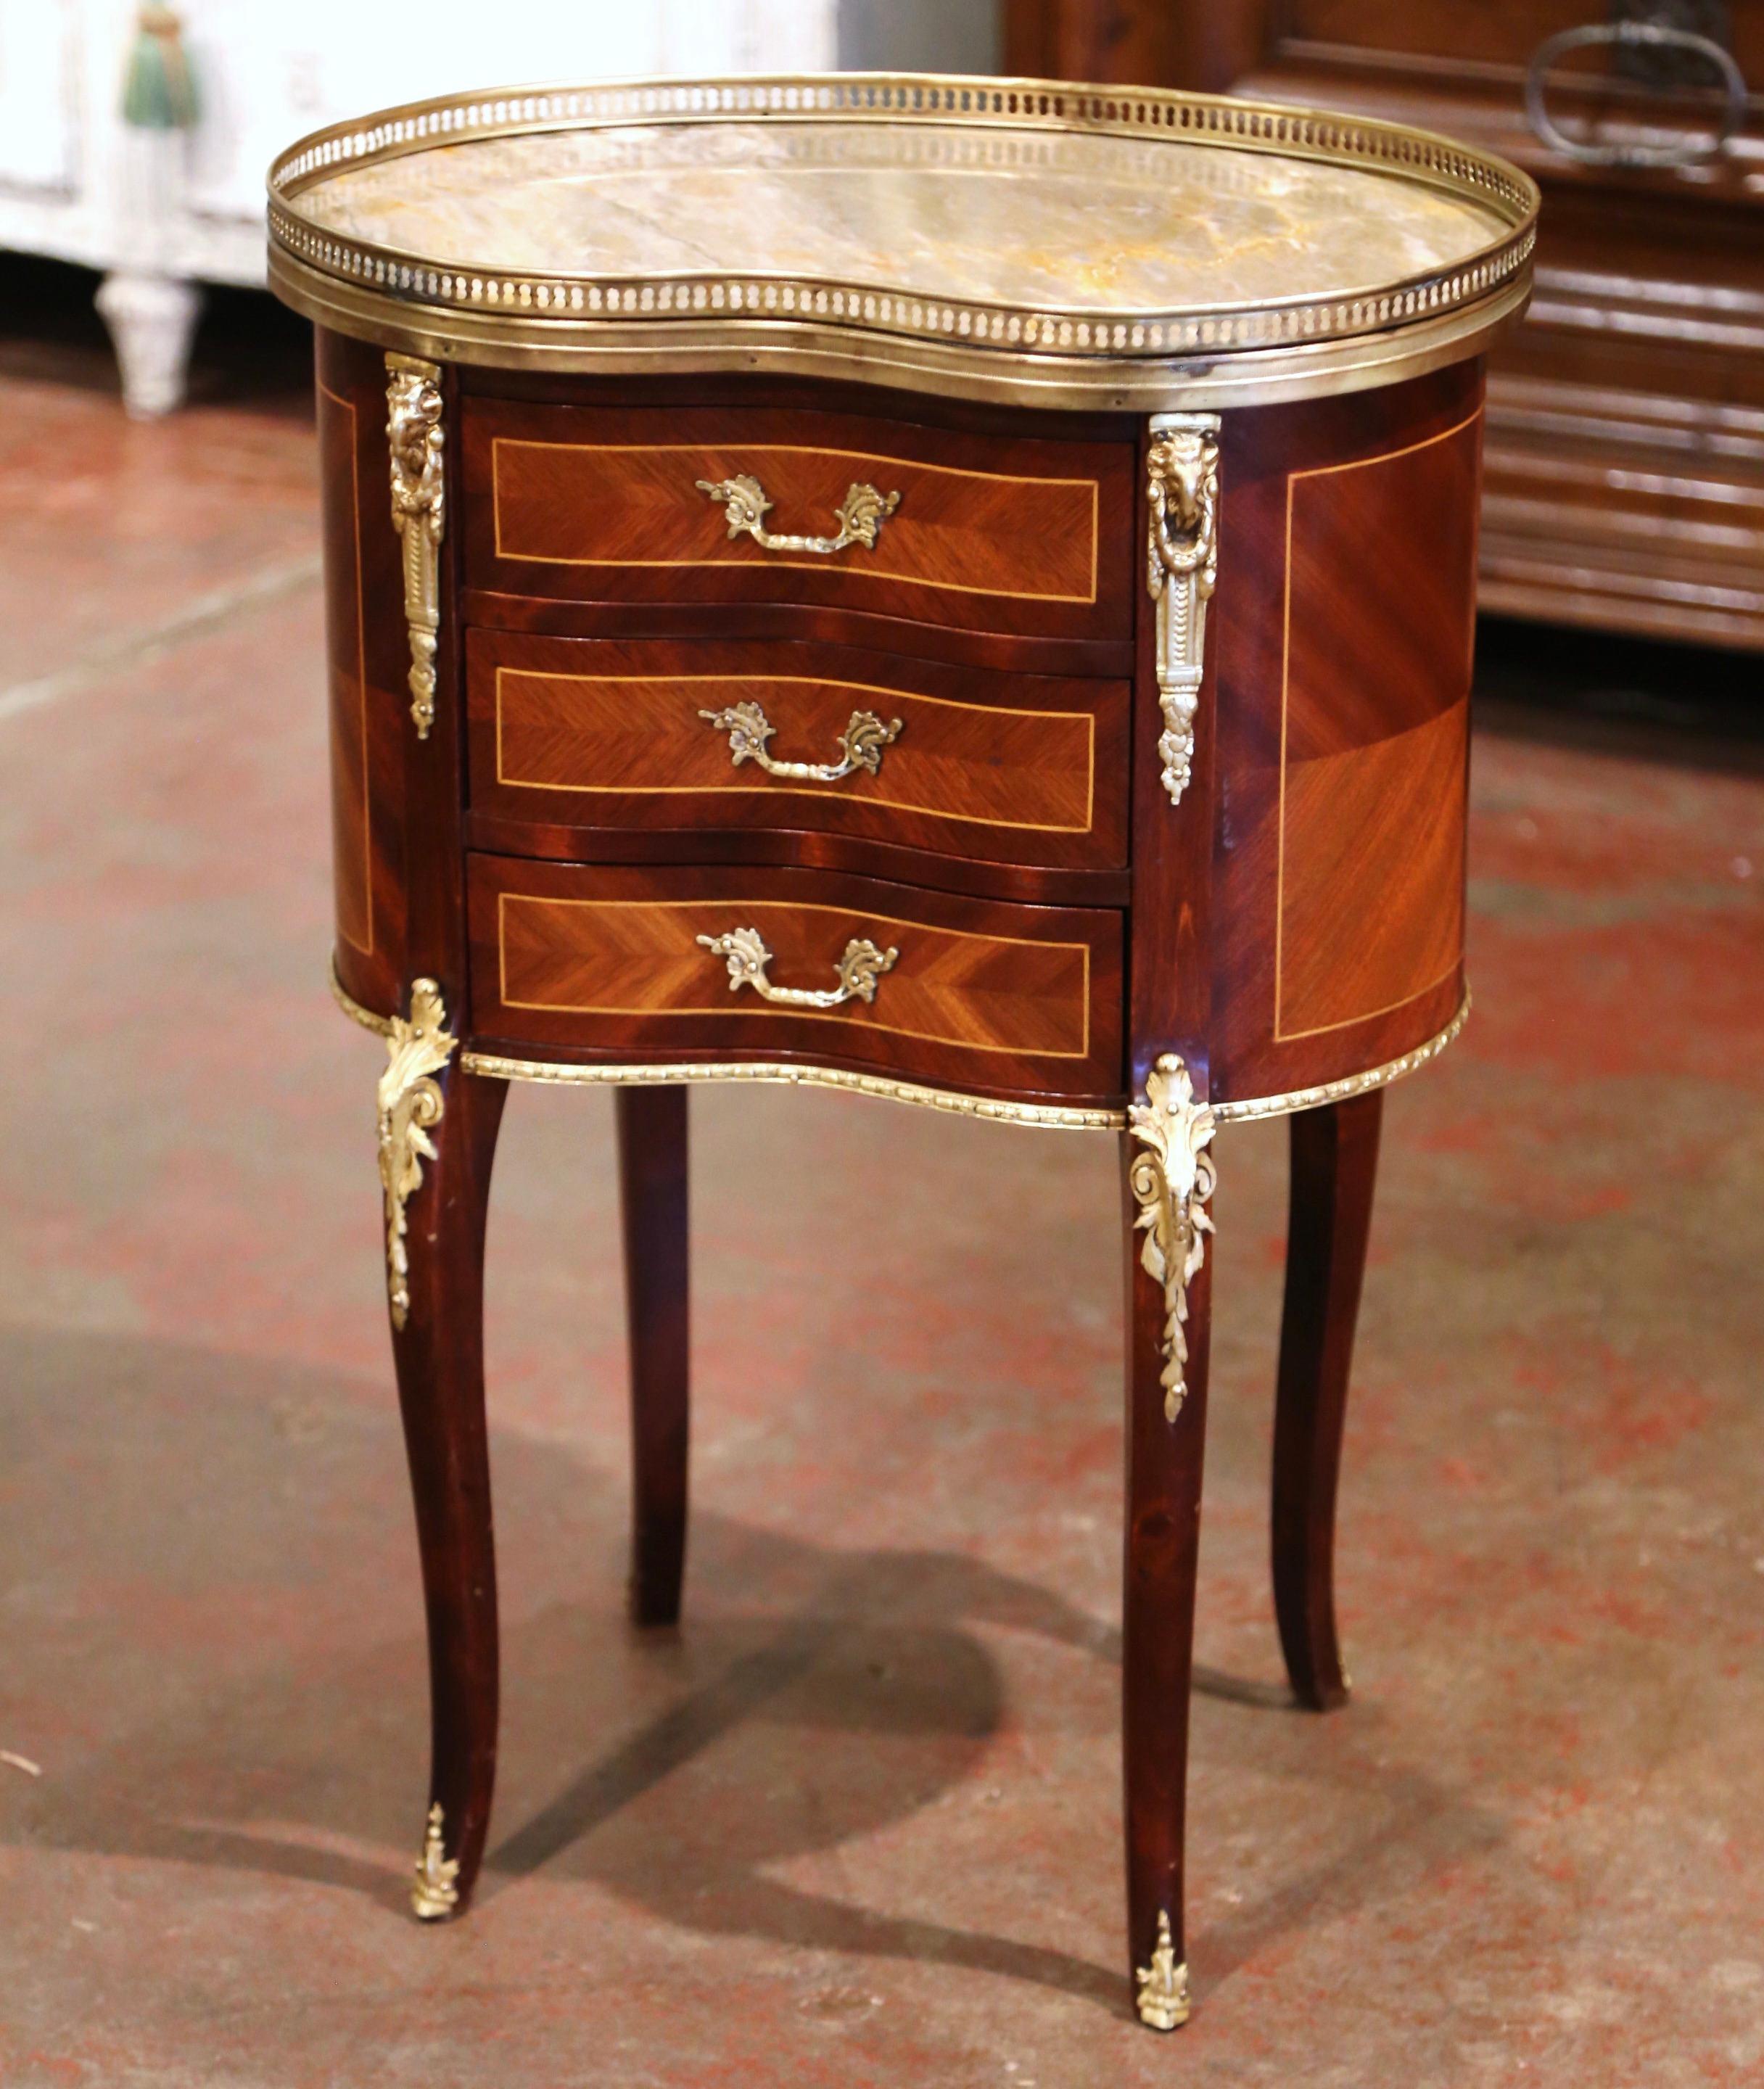 This elegant, kidney-shaped fruitwood antique chest was crafted in France circa 1950. The petite commode sits on cabriole legs decorated with acanthus leaf mounts at the shoulder, and ending with brass sabot feet; it features three drawers across